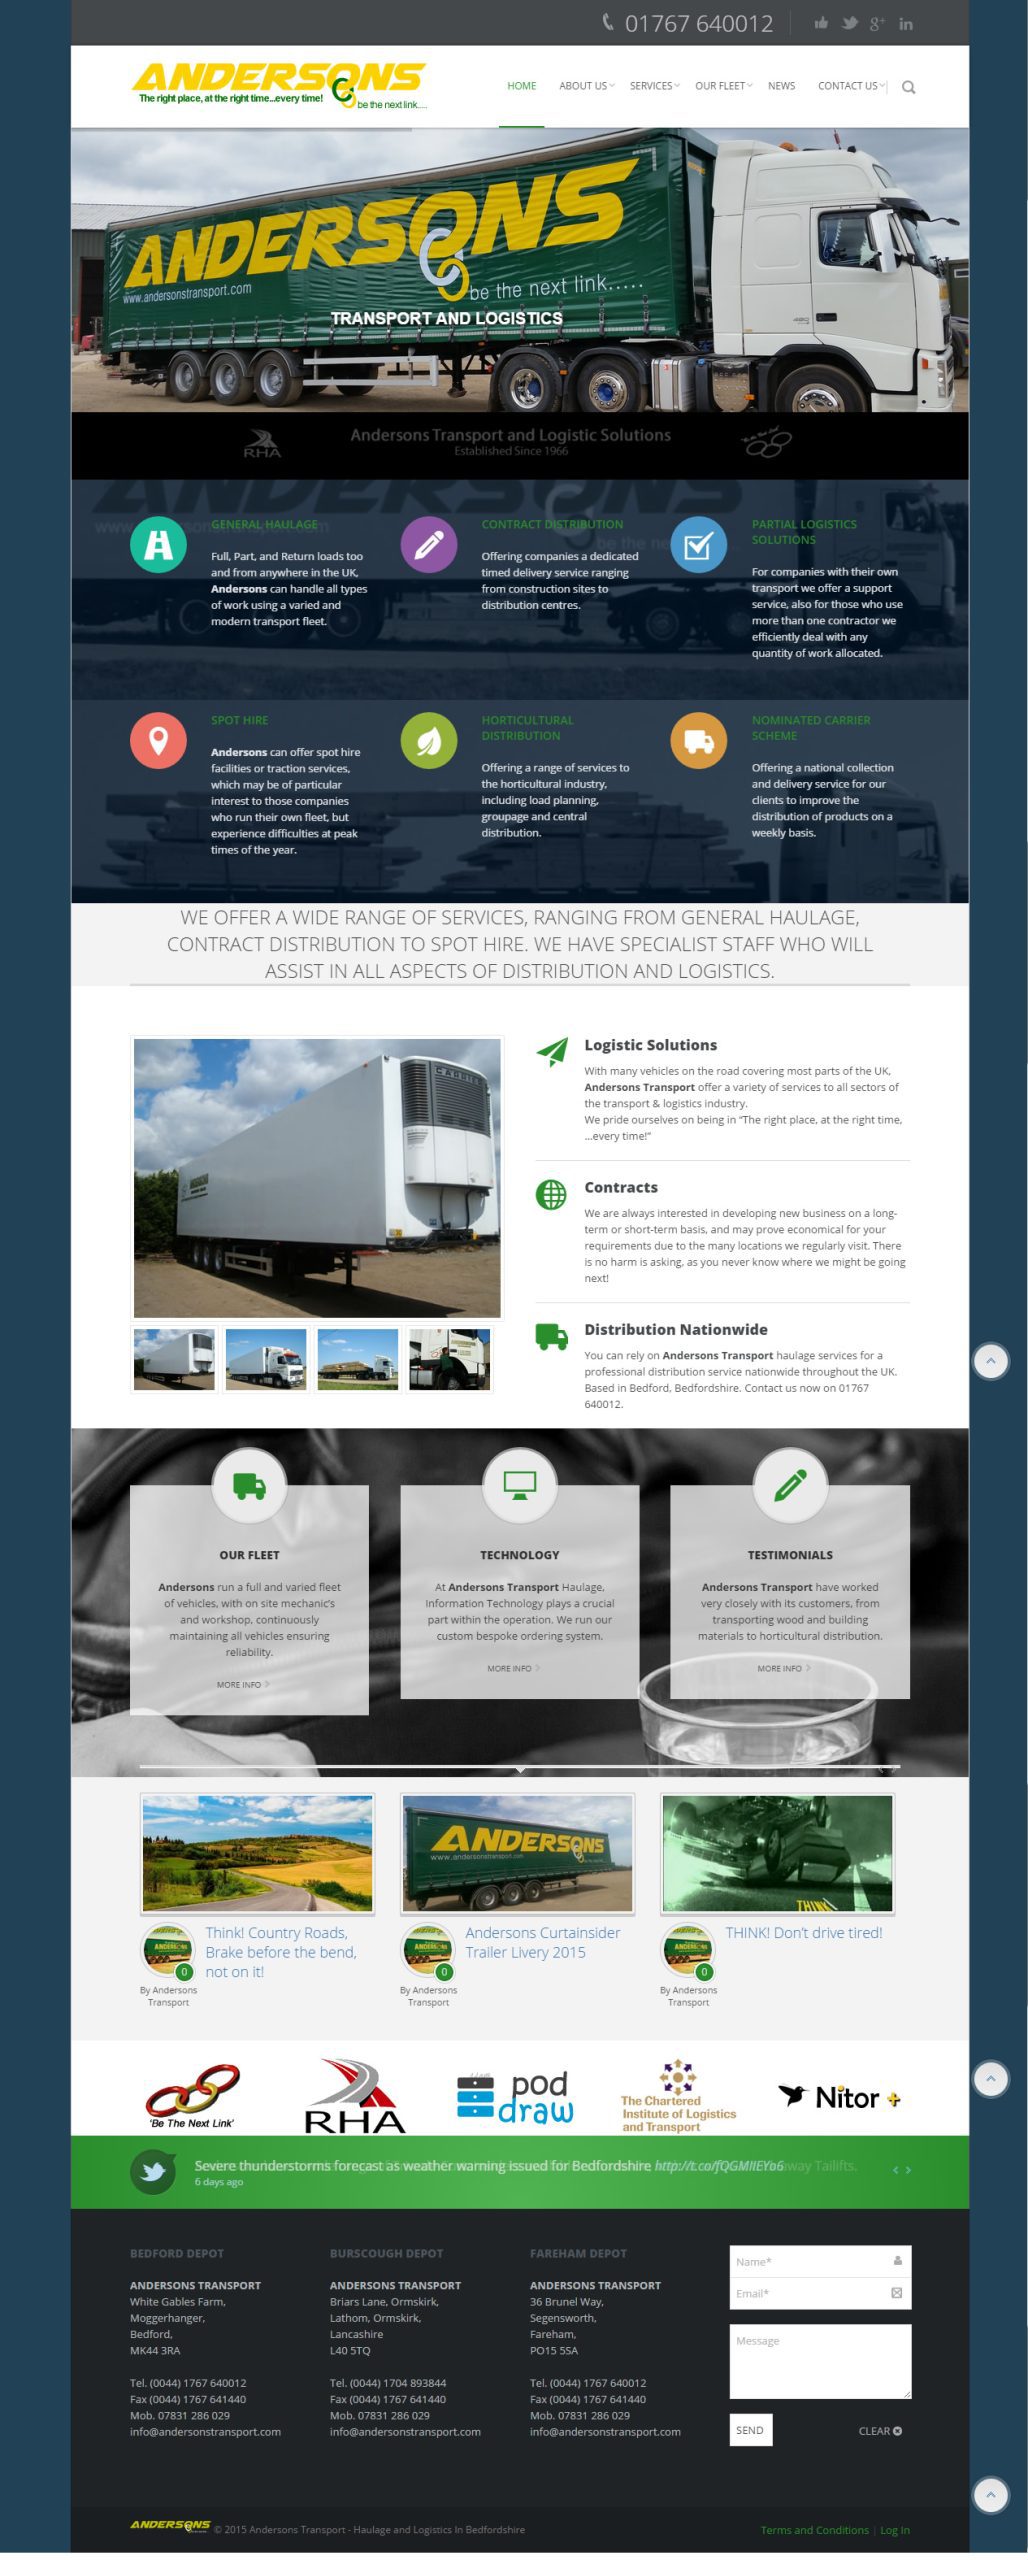 andersons website preview 2015 v2 scaled